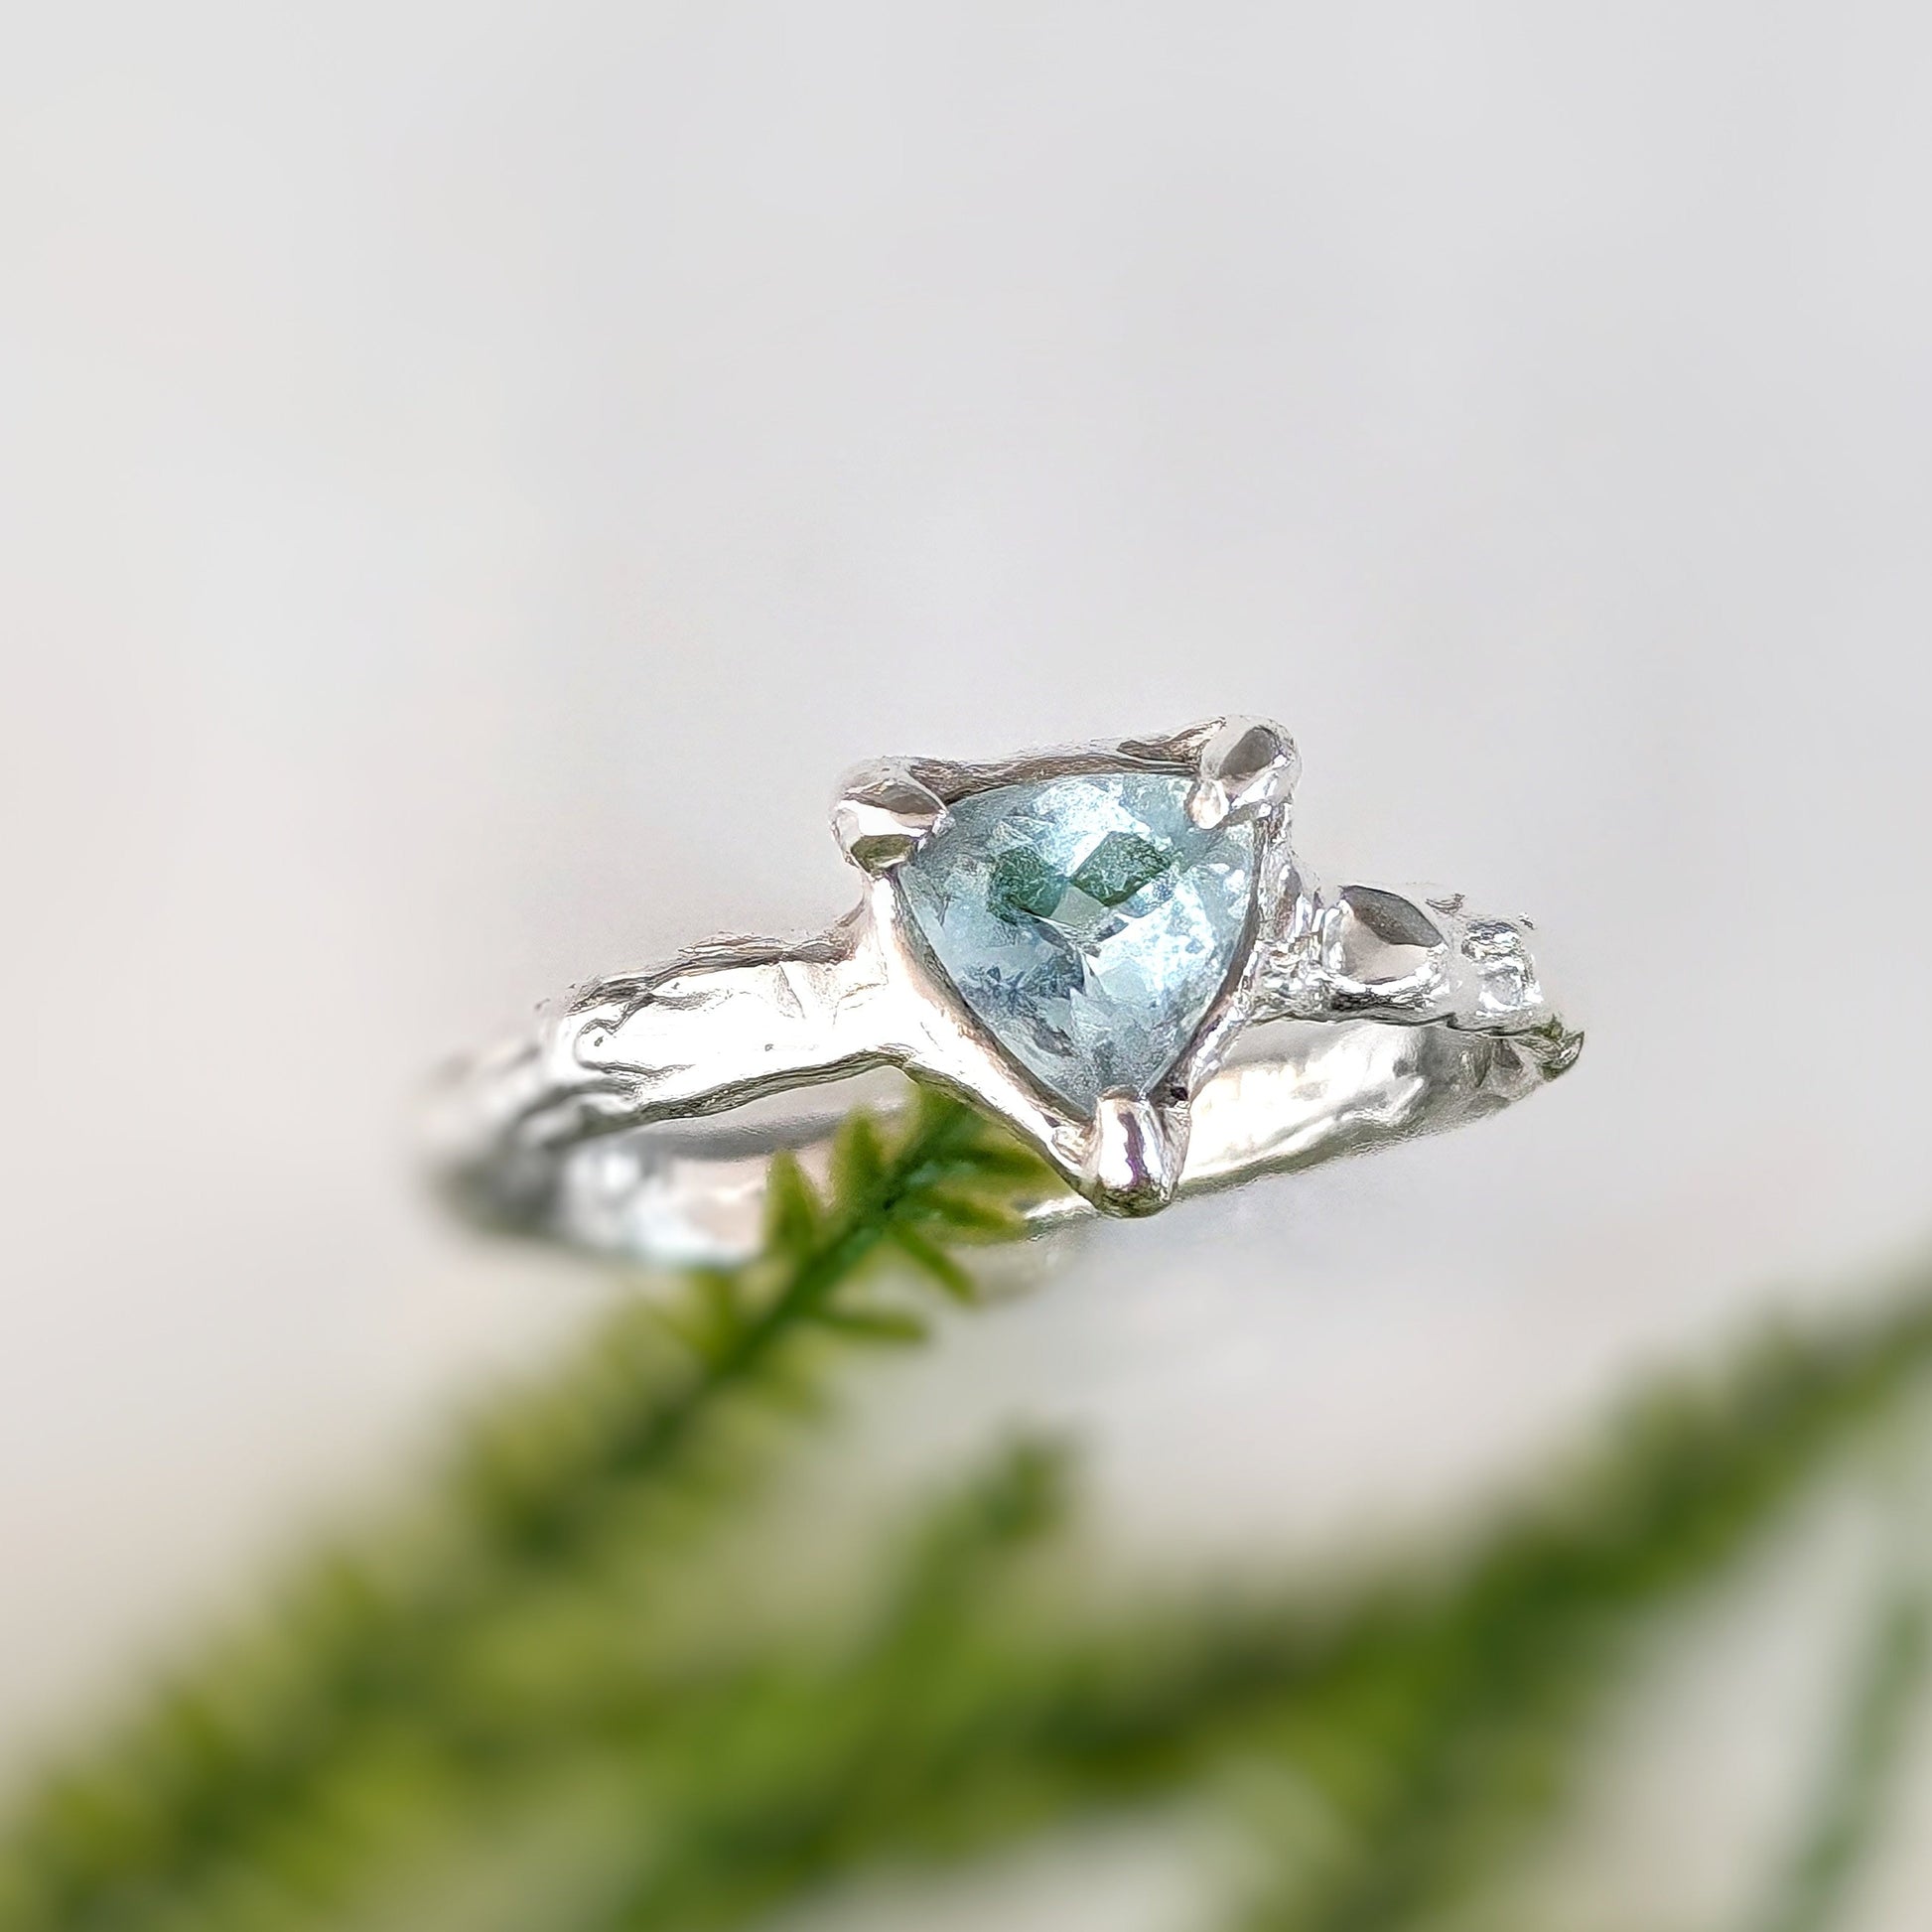 Trilliant shape Aquamarine set by prongs in organic Solid Sterling Silver band